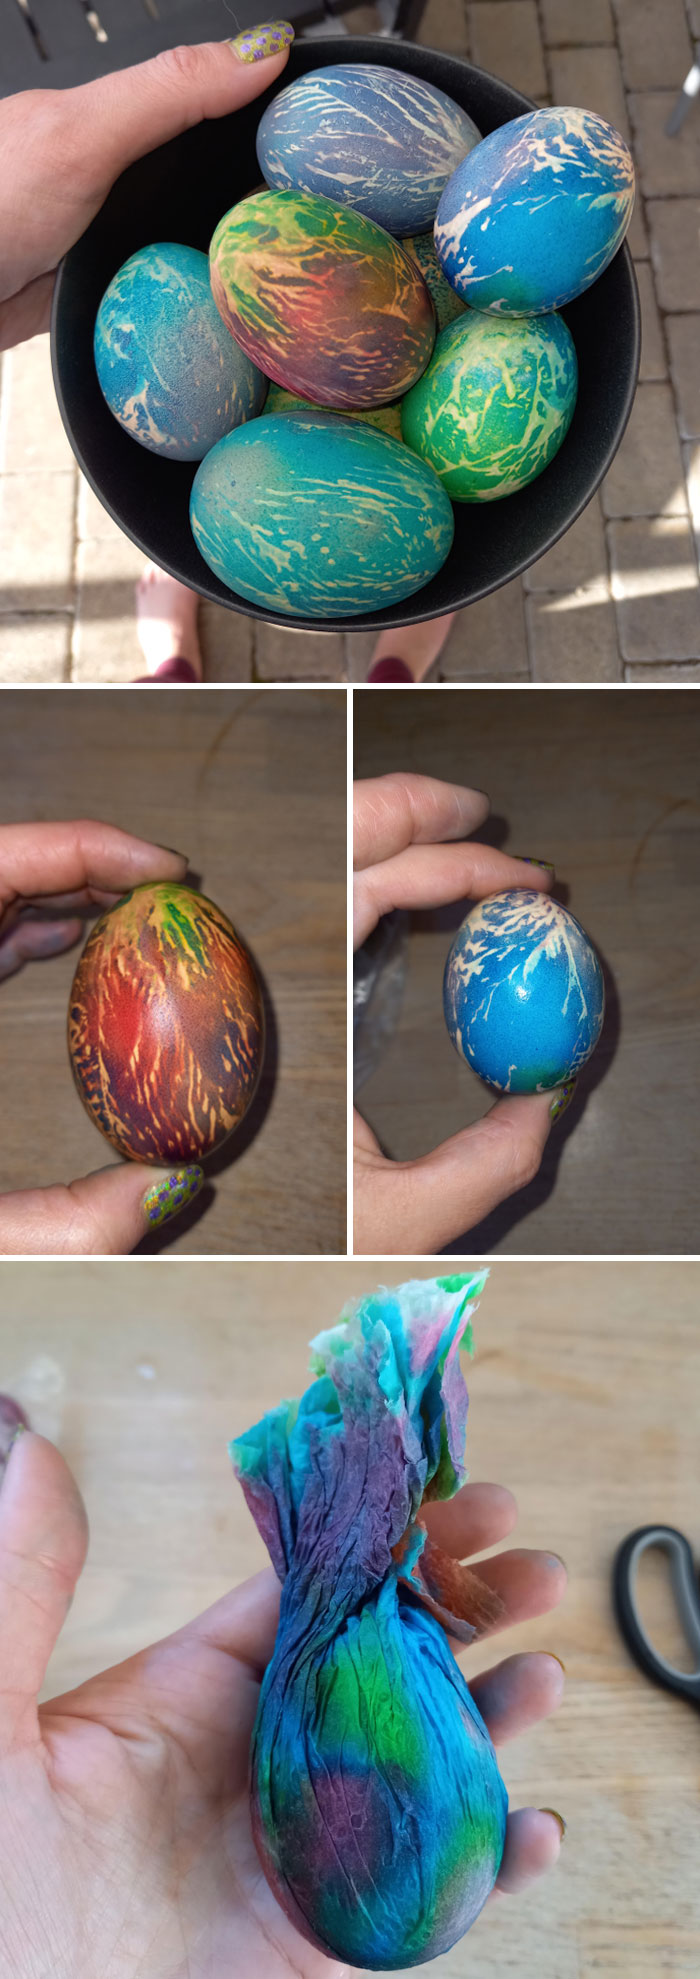 My Daughter And I Made These Fantastic-Looking Eggs For Easter Dinner